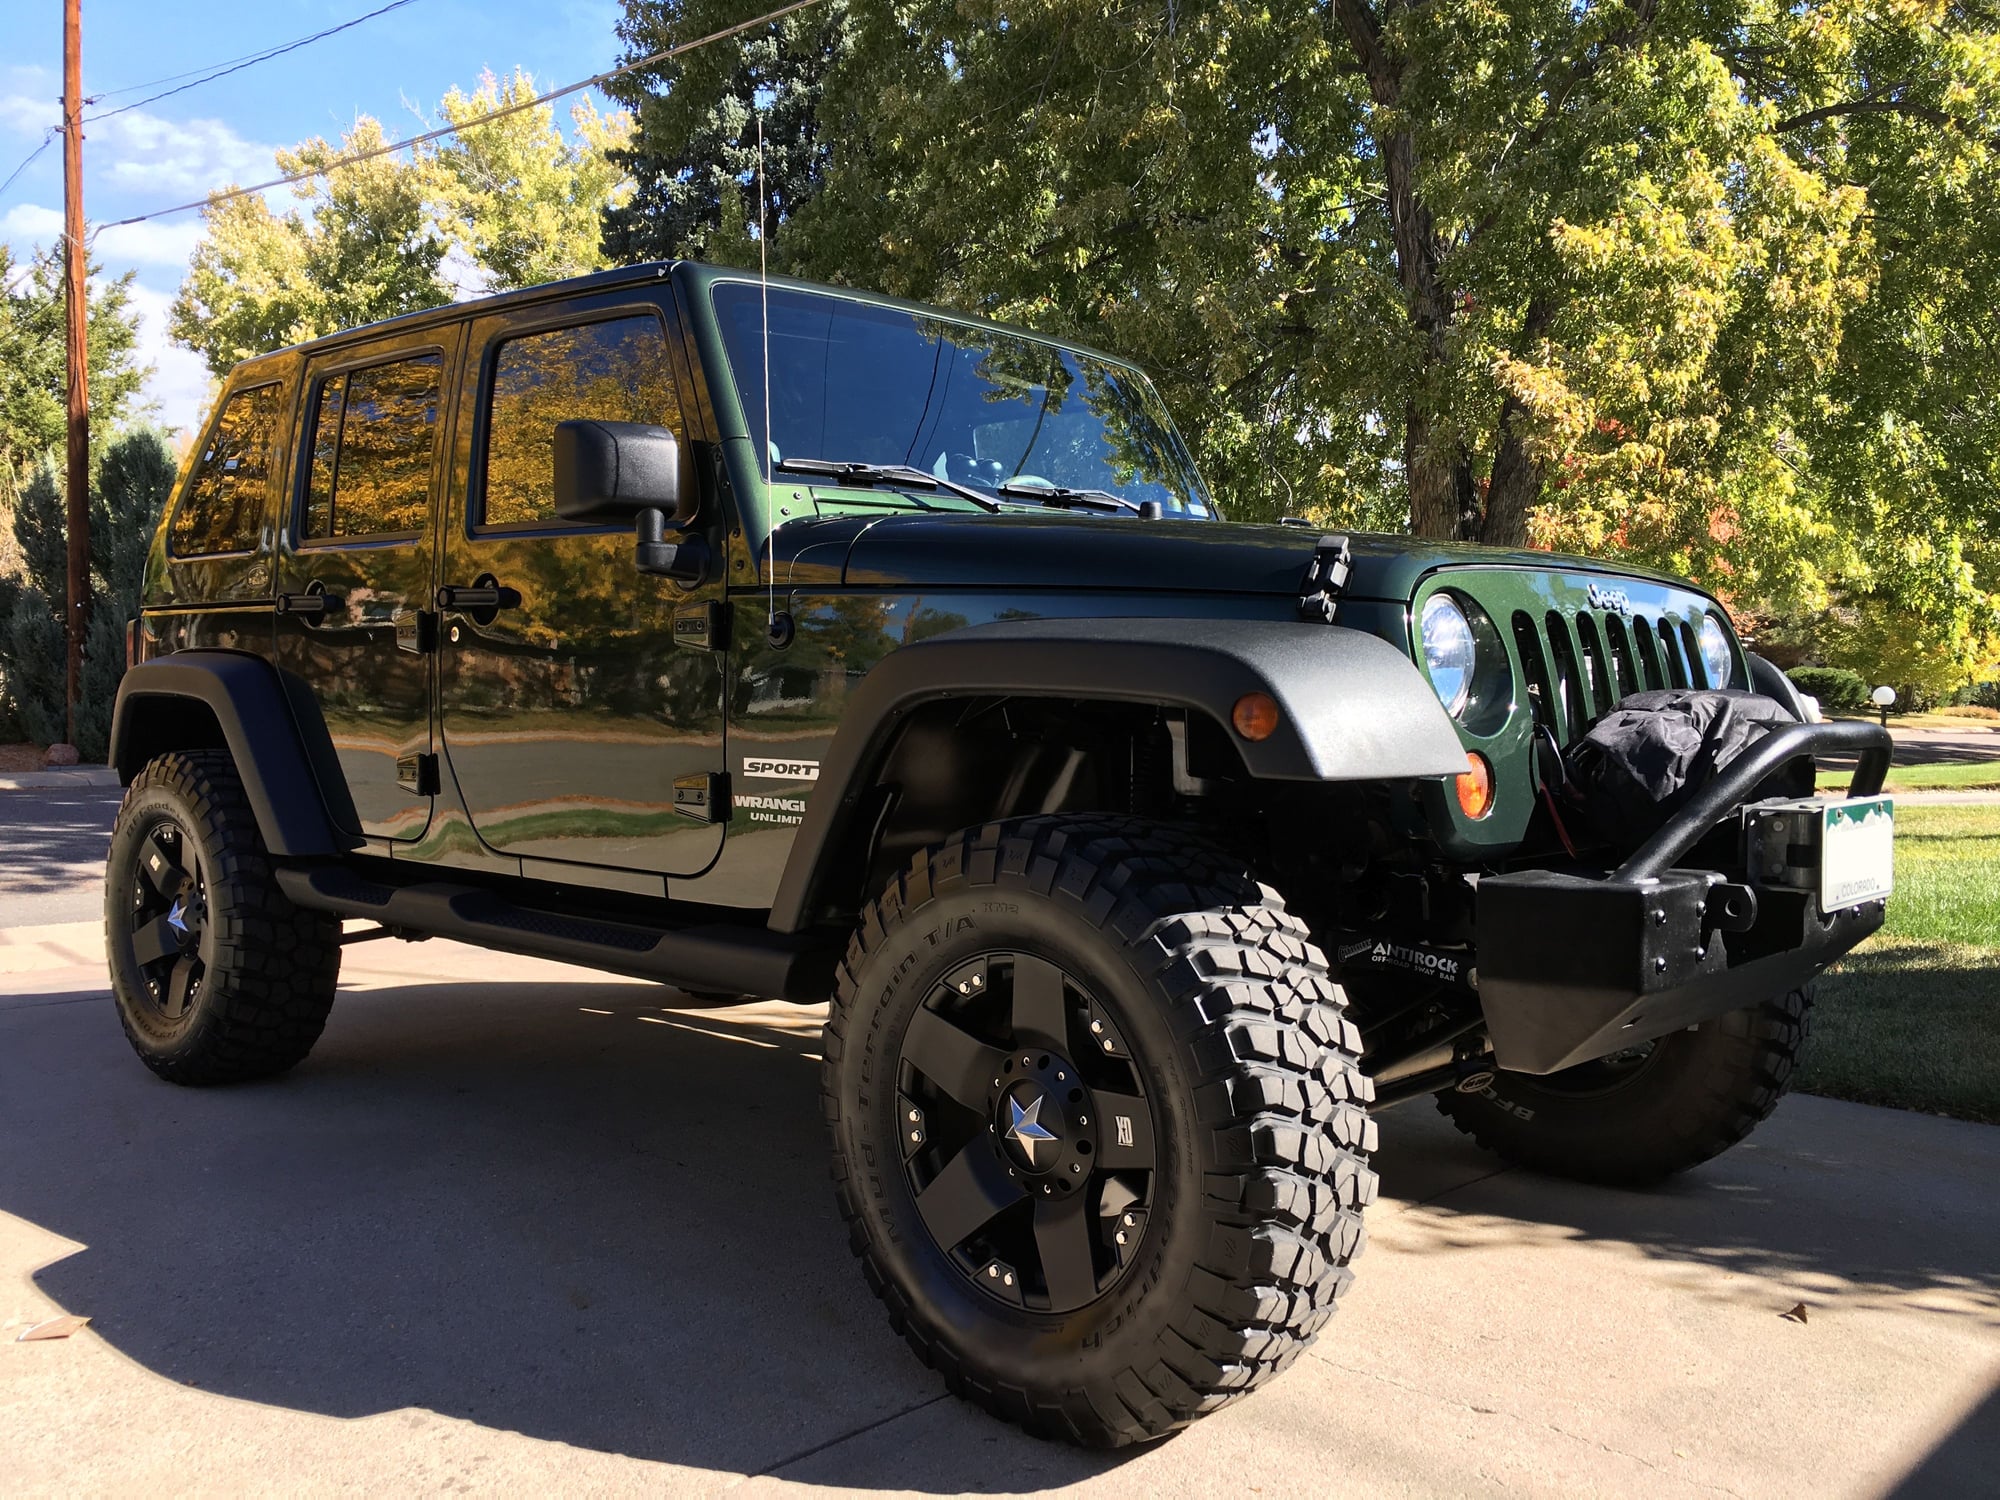 2010 Jeep Wrangler - Supercharged, Clean, Built JKU! - Used - VIN 1J4BA3H18AL216127 - 69,000 Miles - 6 cyl - 4WD - Automatic - SUV - Other - Denver, CO 80222, United States